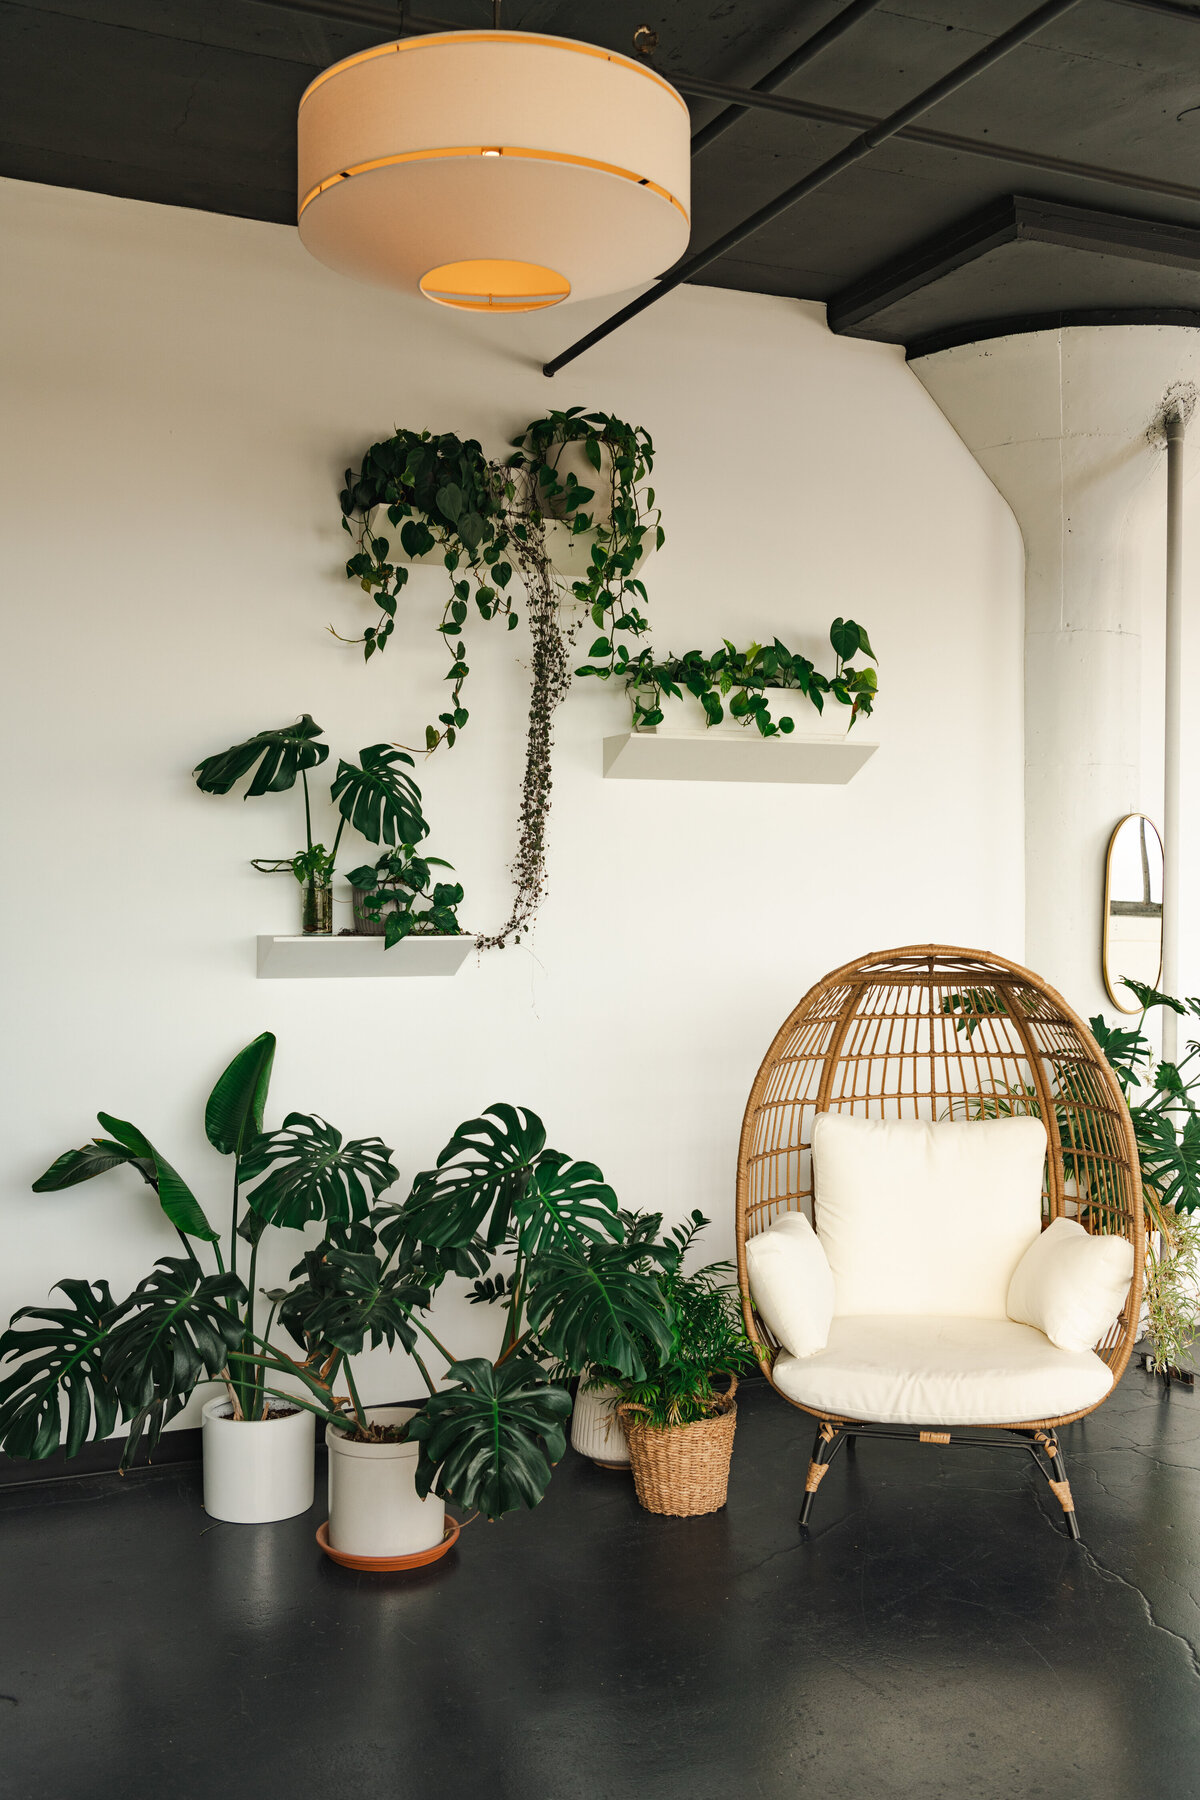 photography studio filled with houseplants with dark floors